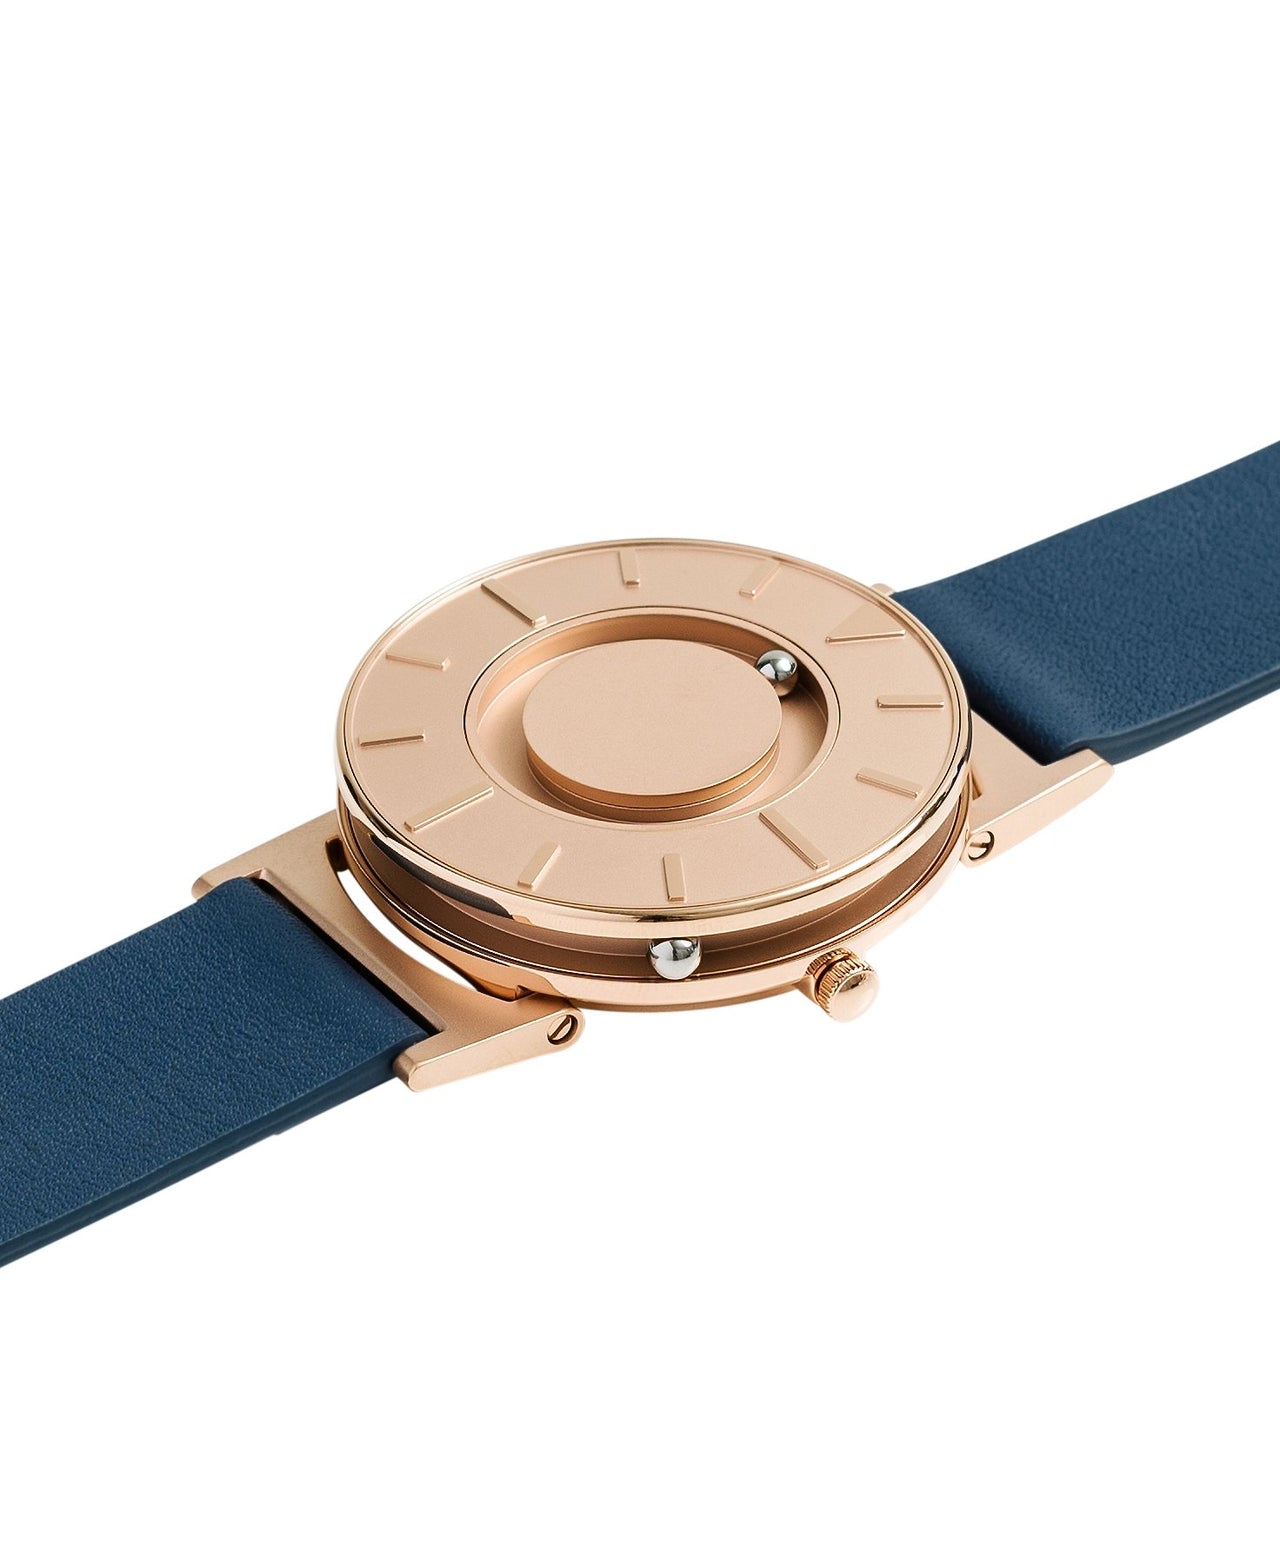 Eone Bradley Lux Rose Gold - Watches & Crystals